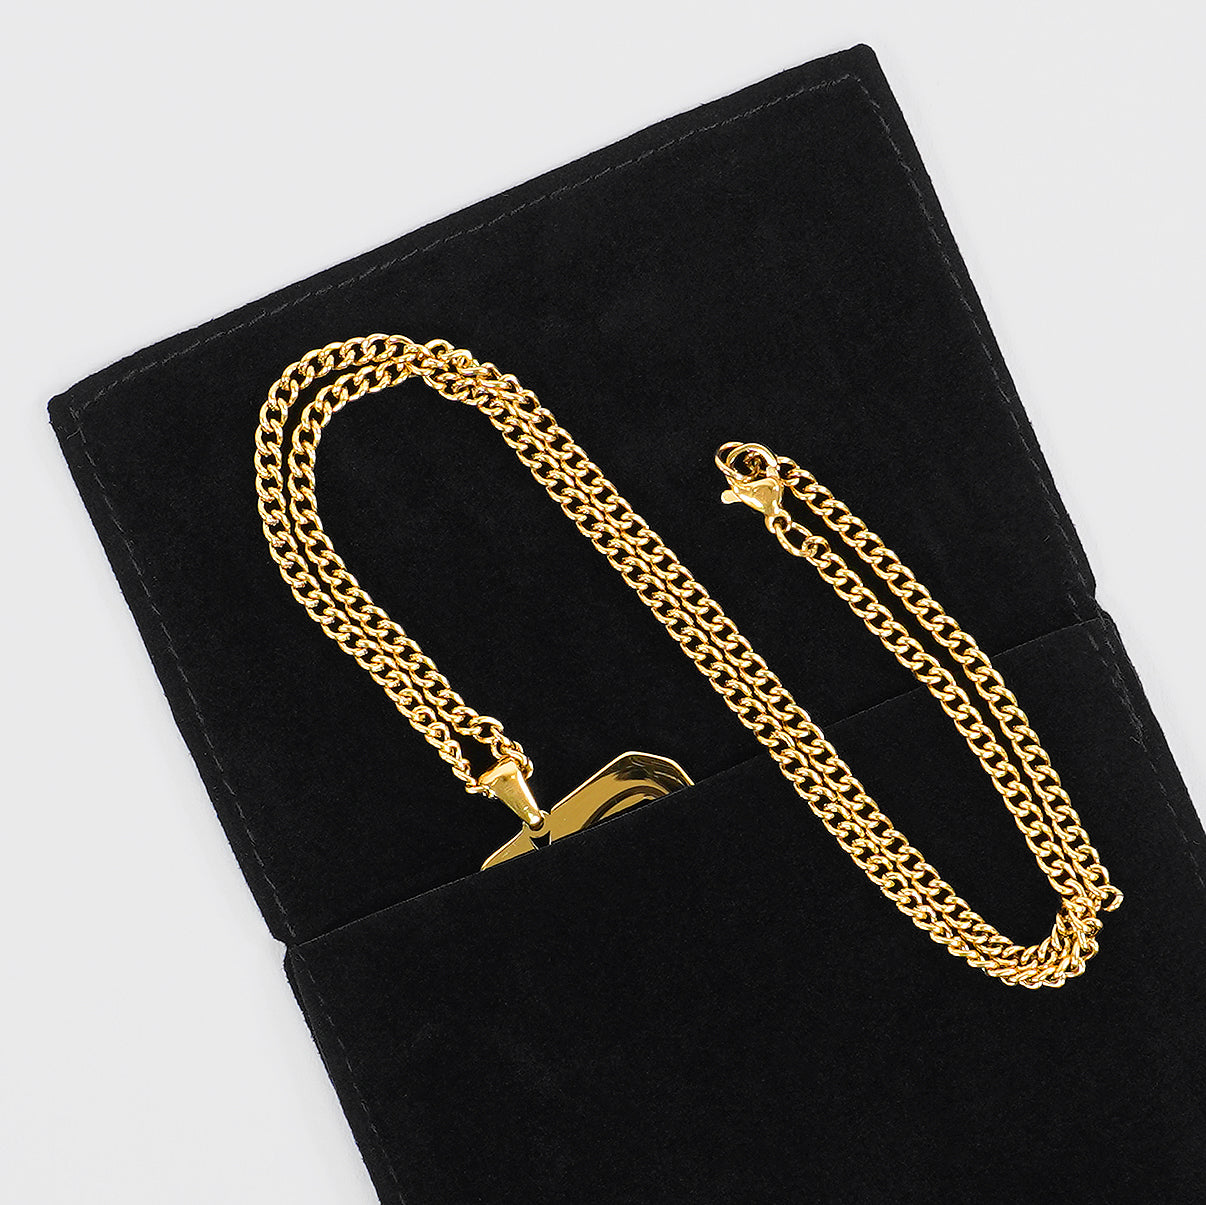 70 Number Pendant with Chain Necklace - Gold Plated Stainless Steel